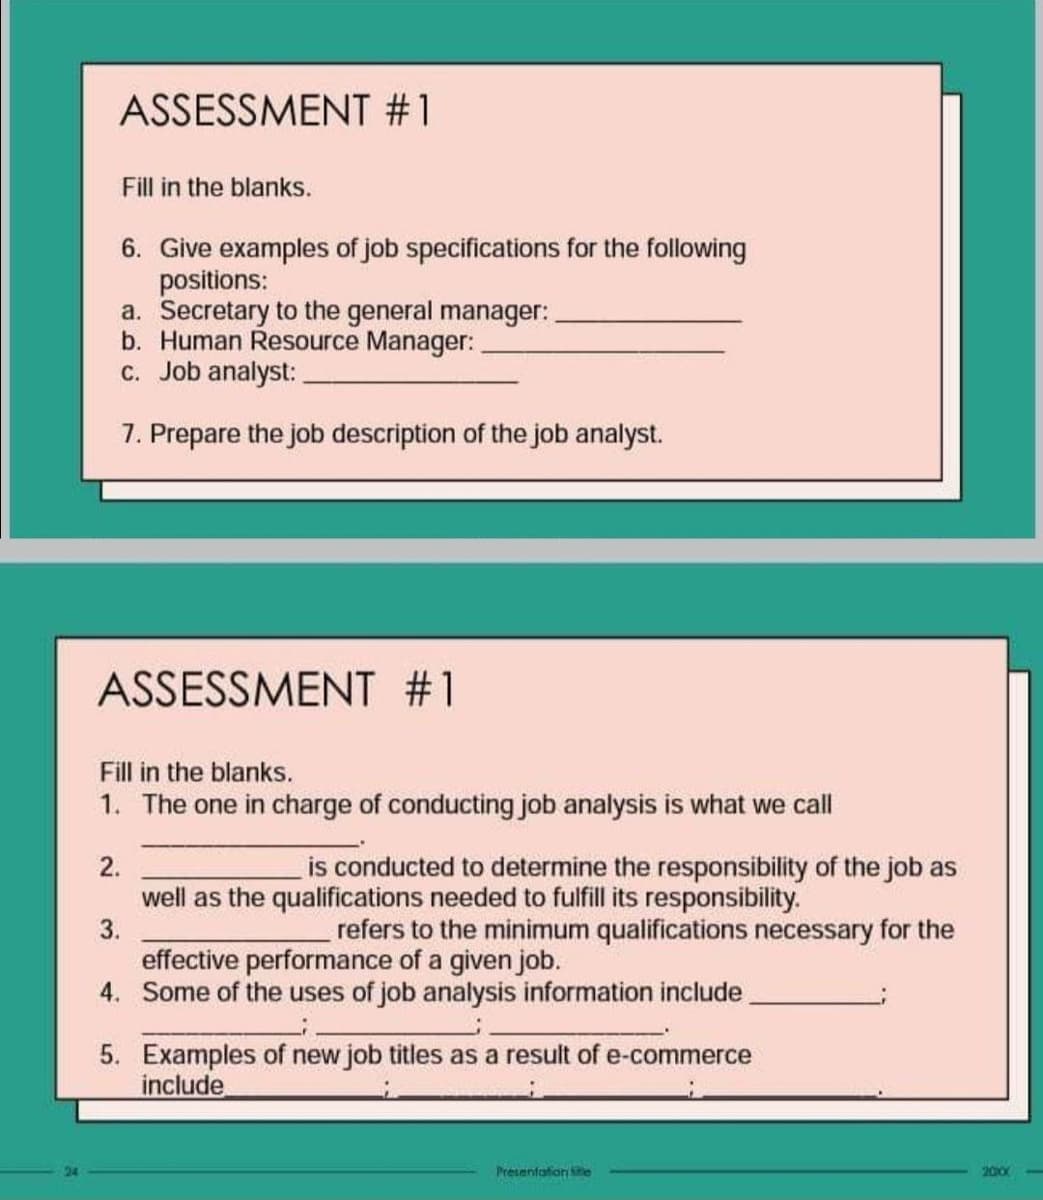 24
ASSESSMENT #1
Fill in the blanks.
6. Give examples of job specifications for the following
positions:
a. Secretary to the general manager:
b. Human Resource Manager:
c. Job analyst:
7. Prepare the job description of the job analyst.
ASSESSMENT #1
Fill in the blanks.
1. The one in charge of conducting job analysis is what we call
is conducted to determine the responsibility of the job as
well as the qualifications needed to fulfill its responsibility.
3.
refers to the minimum qualifications necessary for the
effective performance of a given job.
4. Some of the uses of job analysis information include
2.
5. Examples of new job titles as a result of e-commerce
include
Presentation te
2000